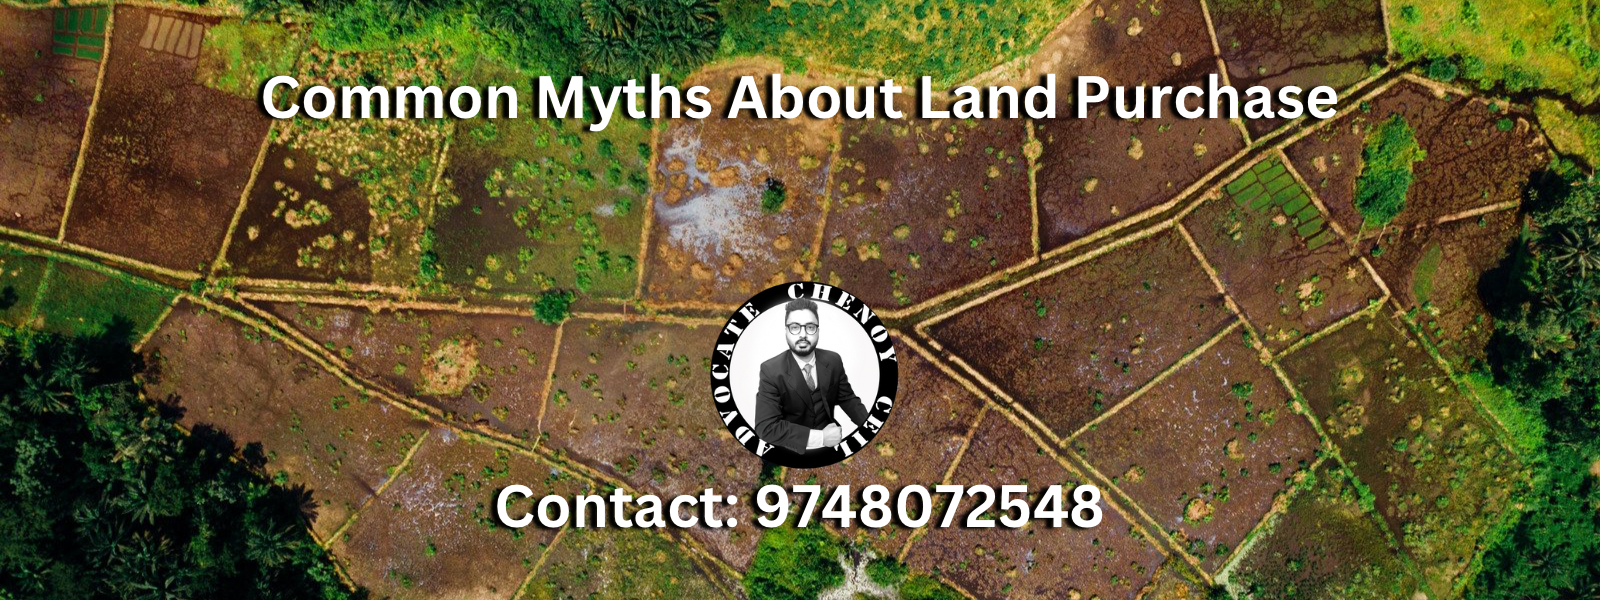 Myths about Land Purchase